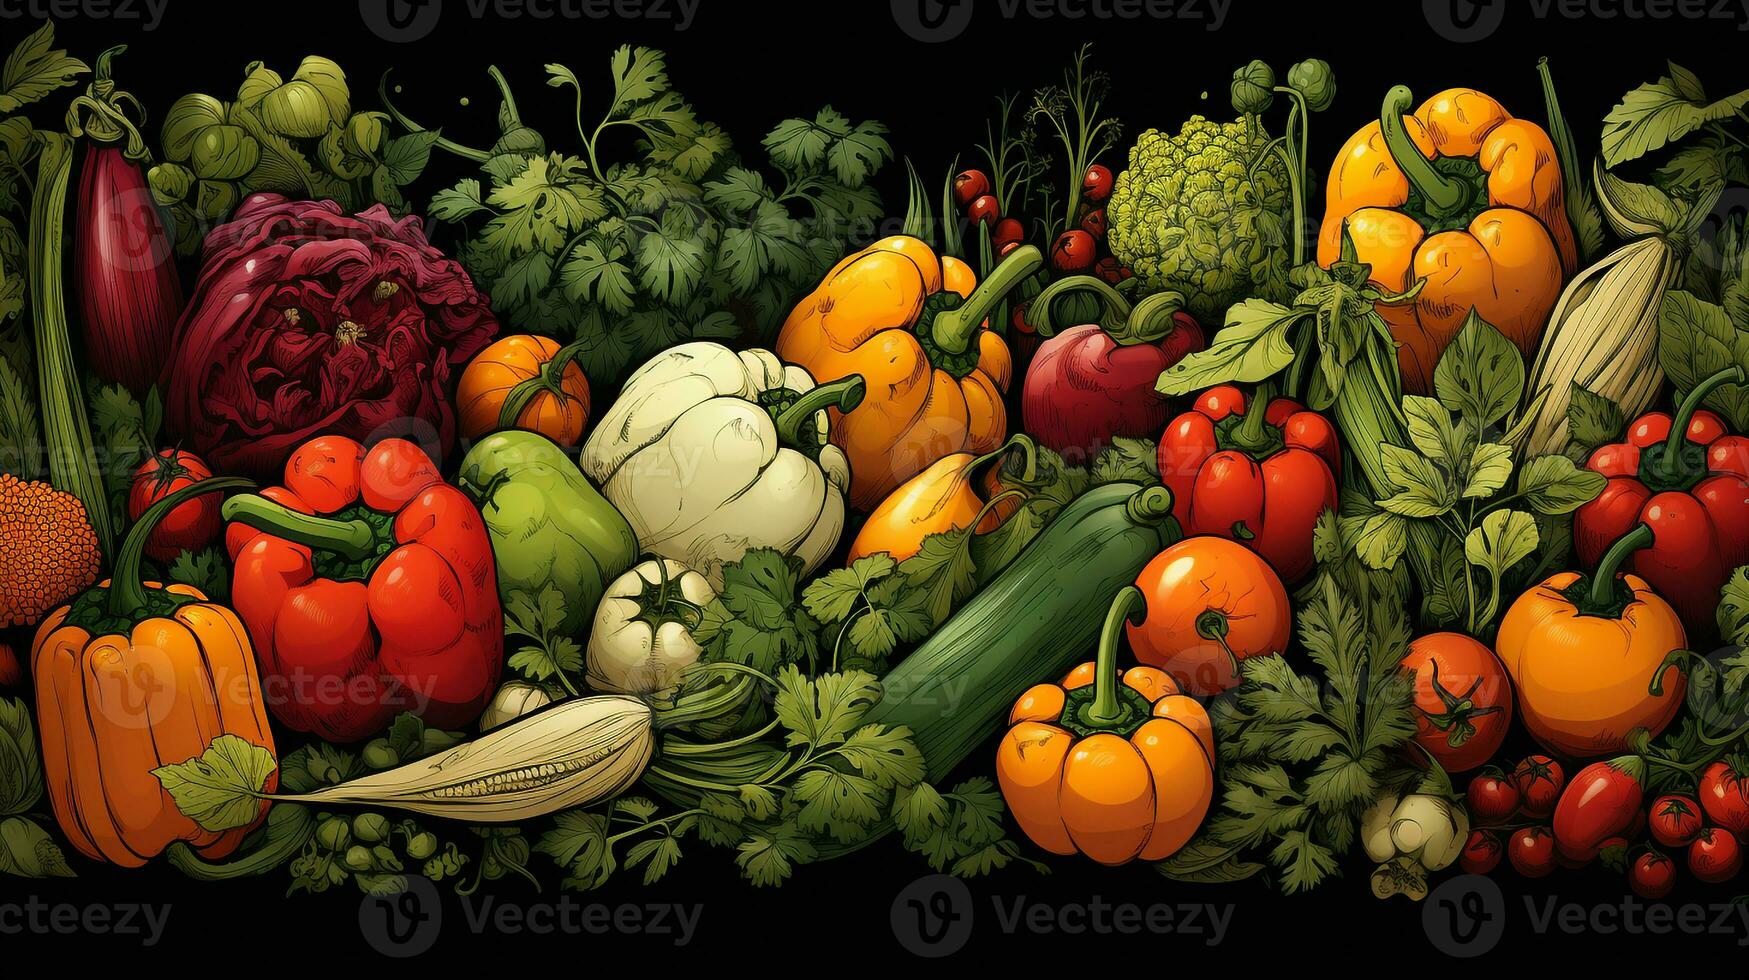 Background of various kinds of fresh vegetables photo